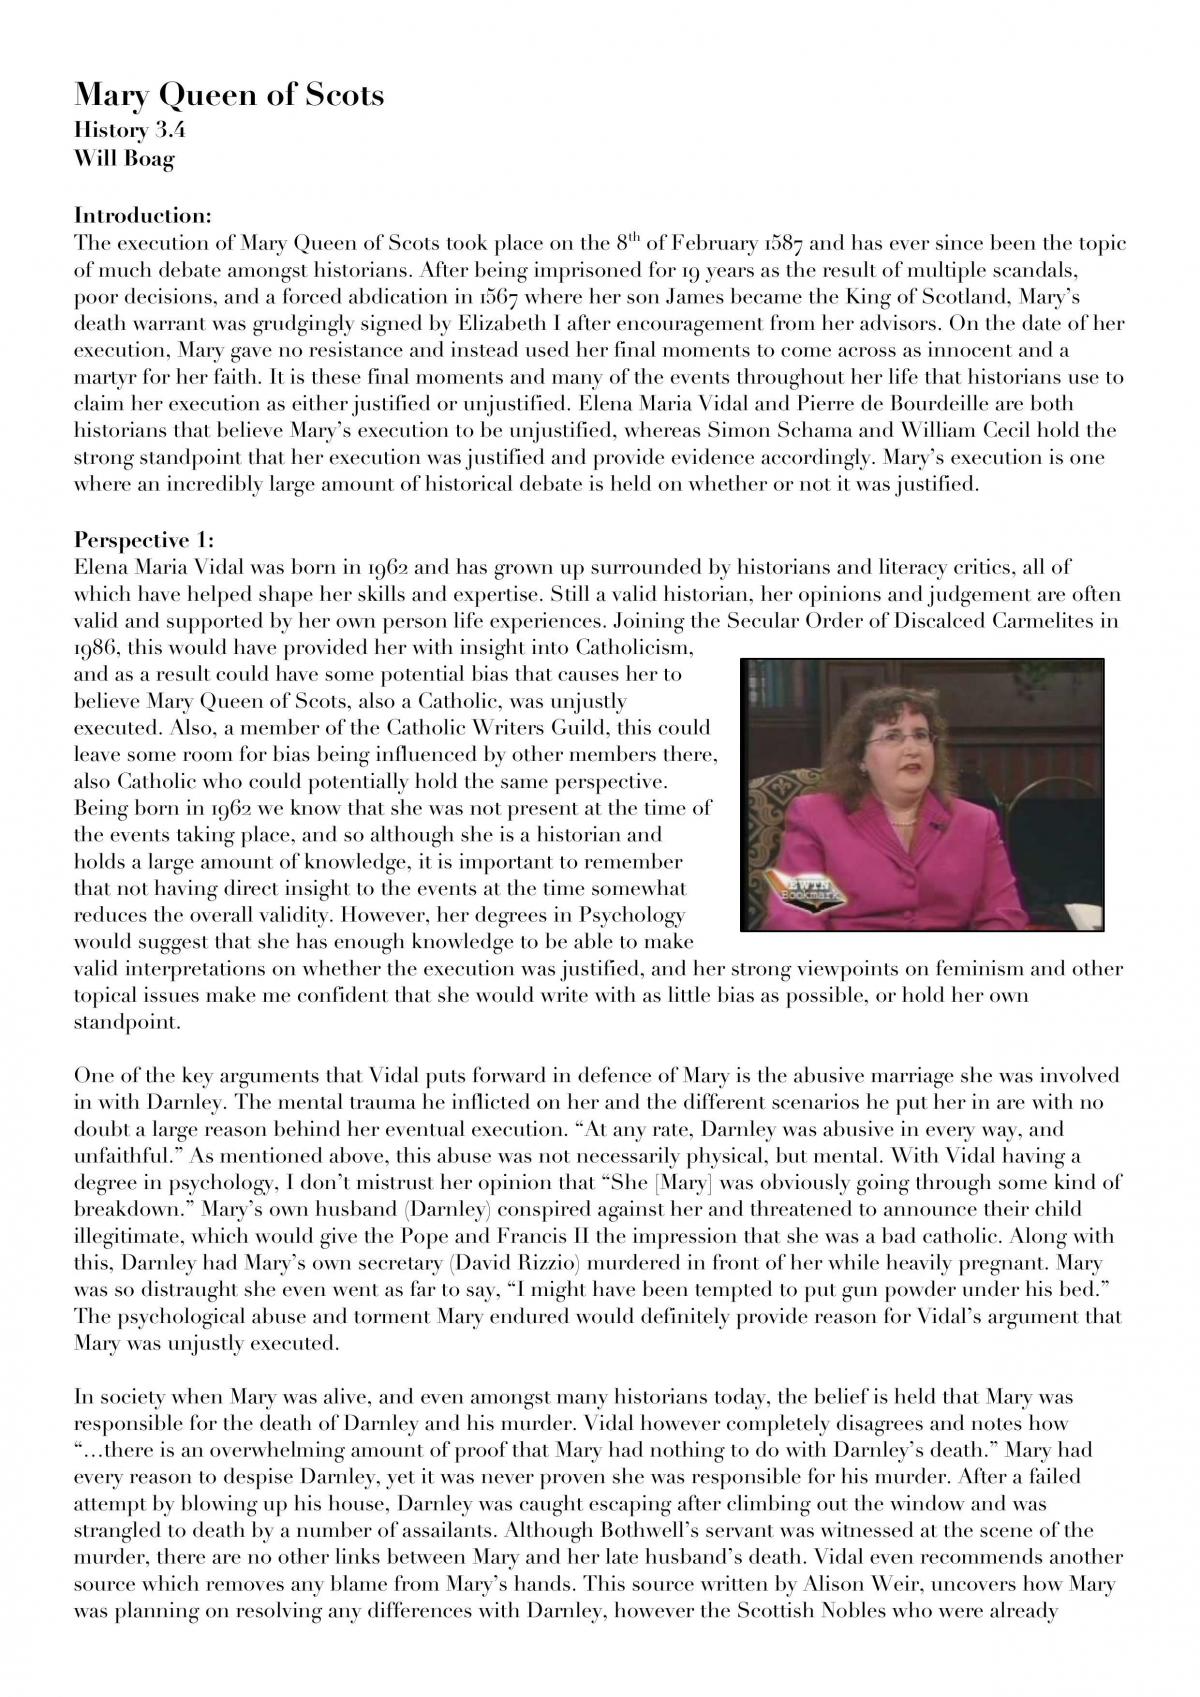 History 3.4 - Historical Debate on Mary Queen of Scots execution - Page 1